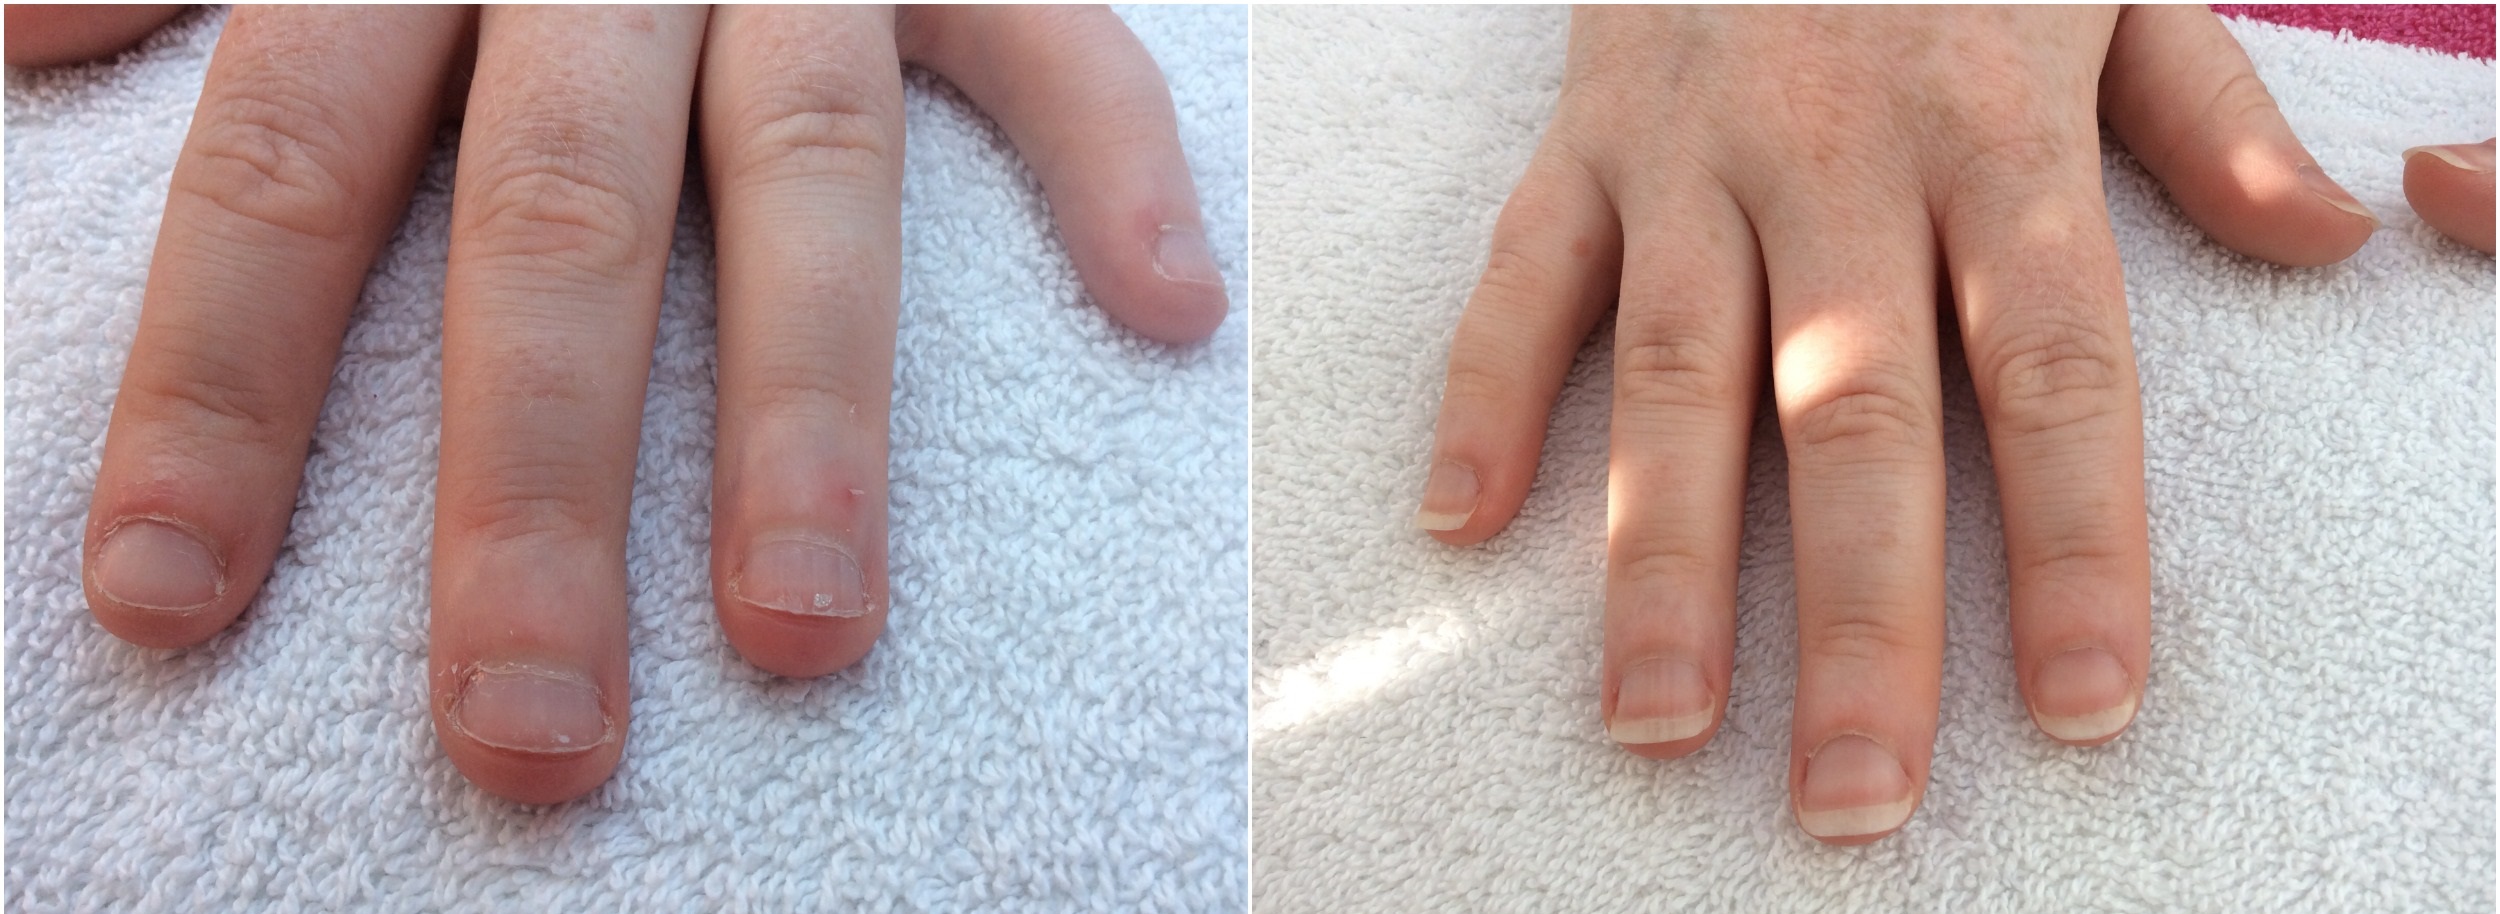 Before and After IBX nail treatment Marie-Louise Coster